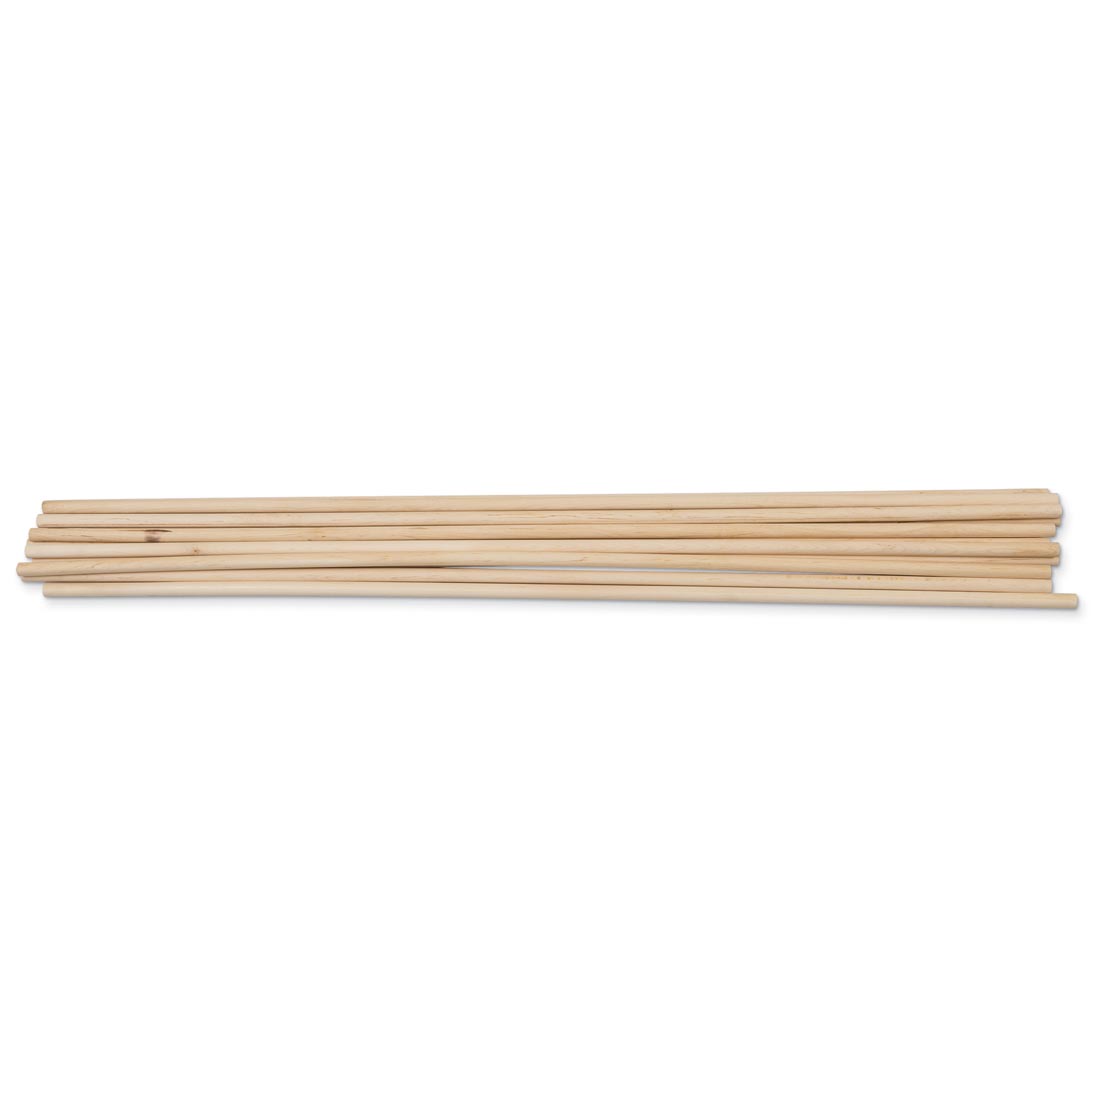 Creativity Street 36" long by 1/2" Diameter natural Wooden Dowels, 12-count